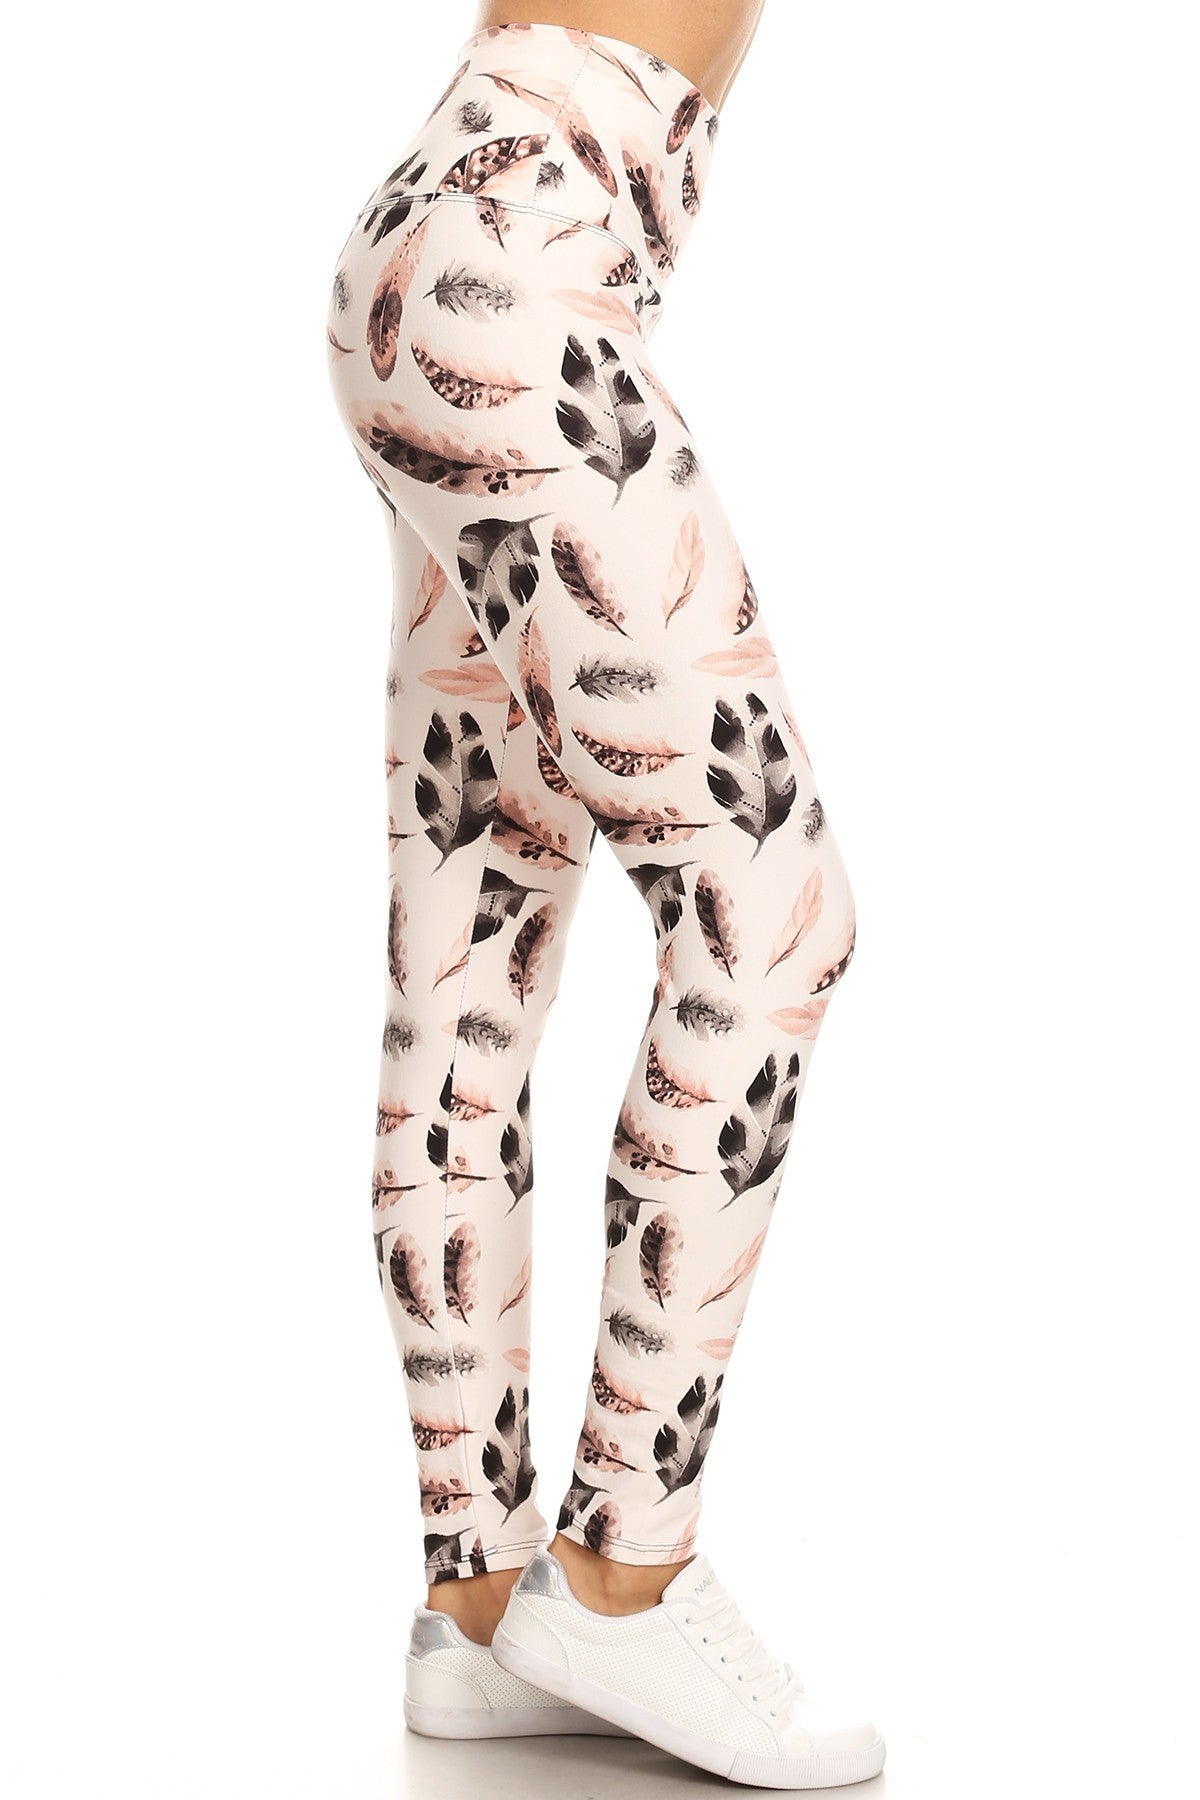 Long Yoga Style Banded Lined Leaf Printed Knit Legging With High Waist - Love It Clothing